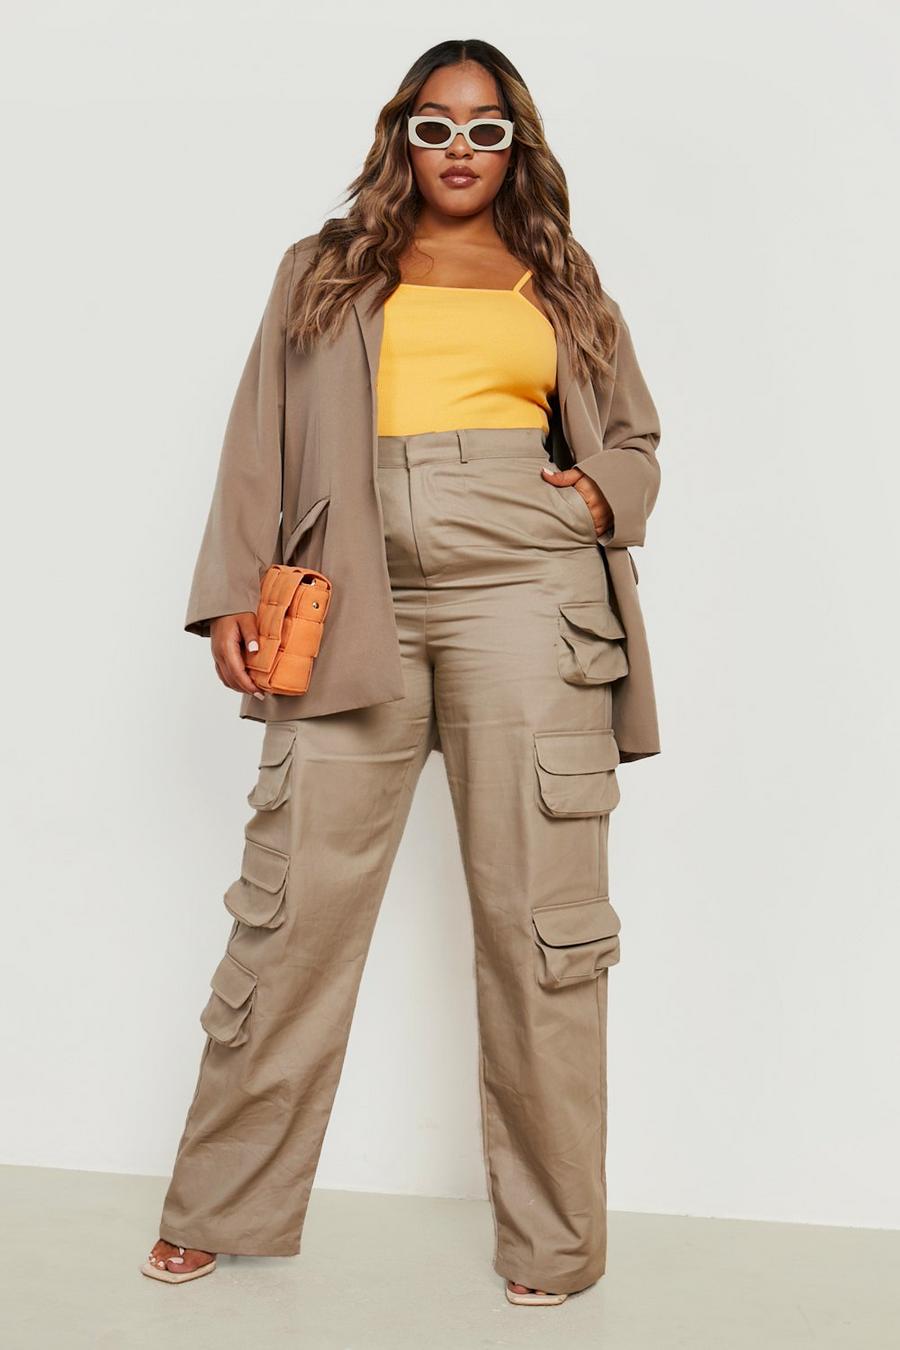 Boohoo Synthetic Tall Cuffed Hem Mid Rise Cargo Pants in Chocolate Womens Clothing Trousers Slacks and Chinos Cargo trousers Brown 